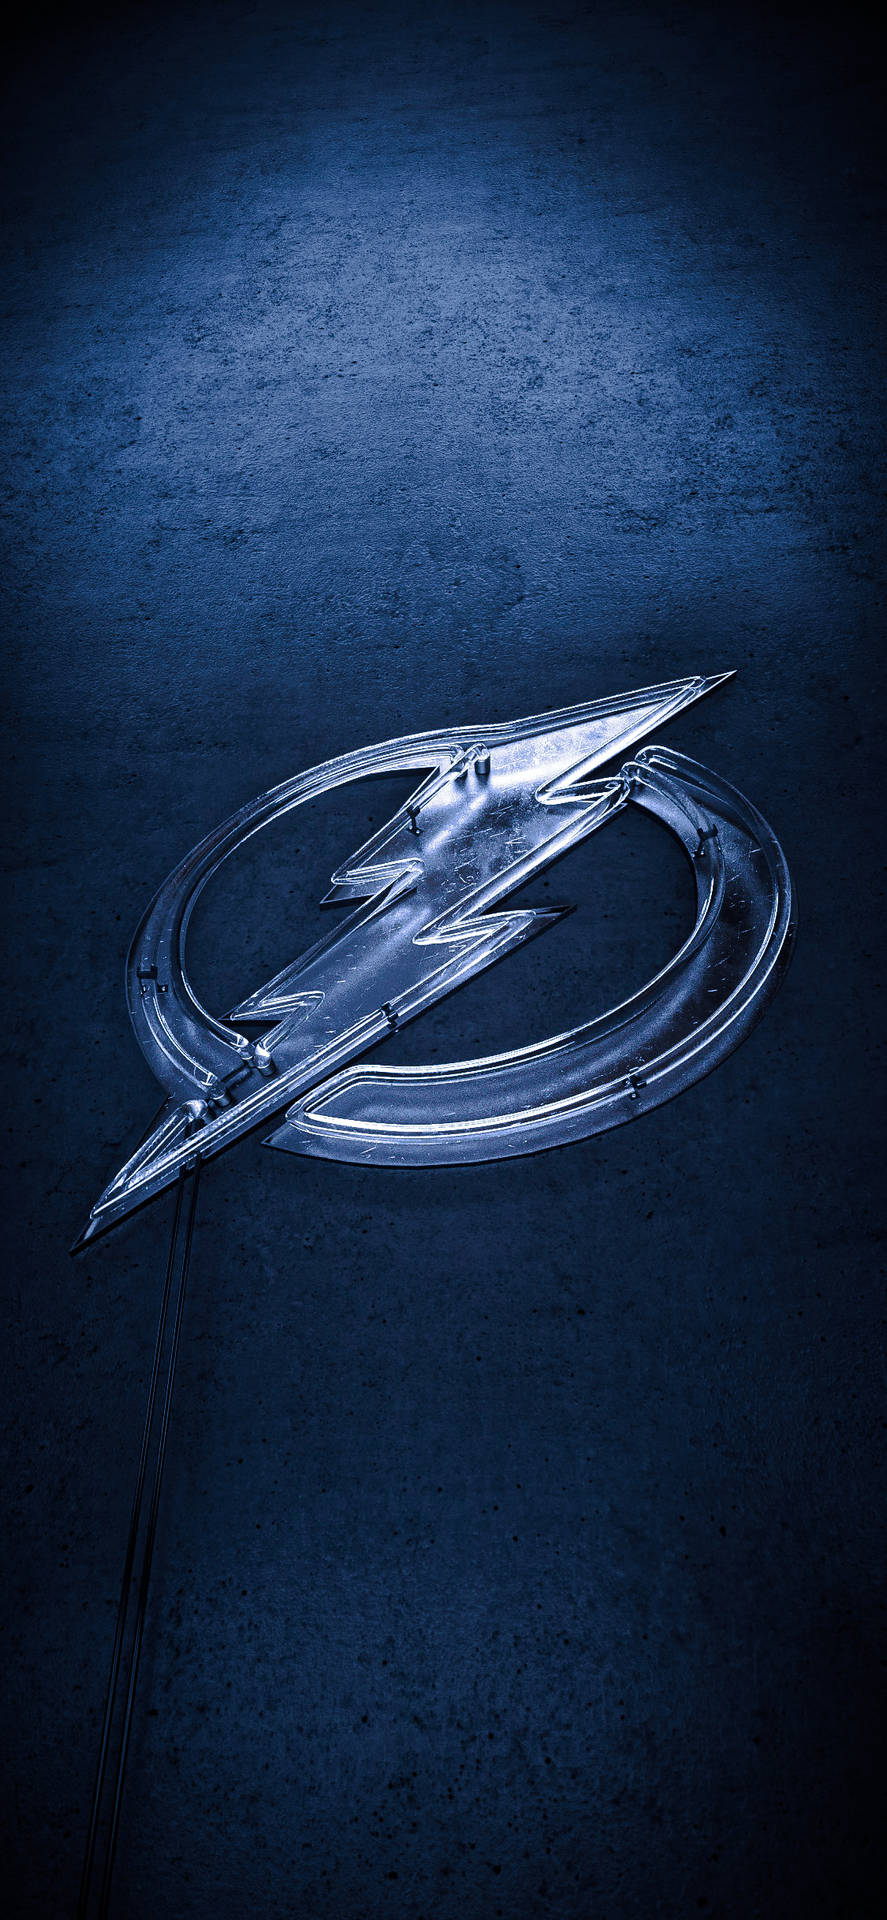 Silver And Blue Tampa Bay Lightning